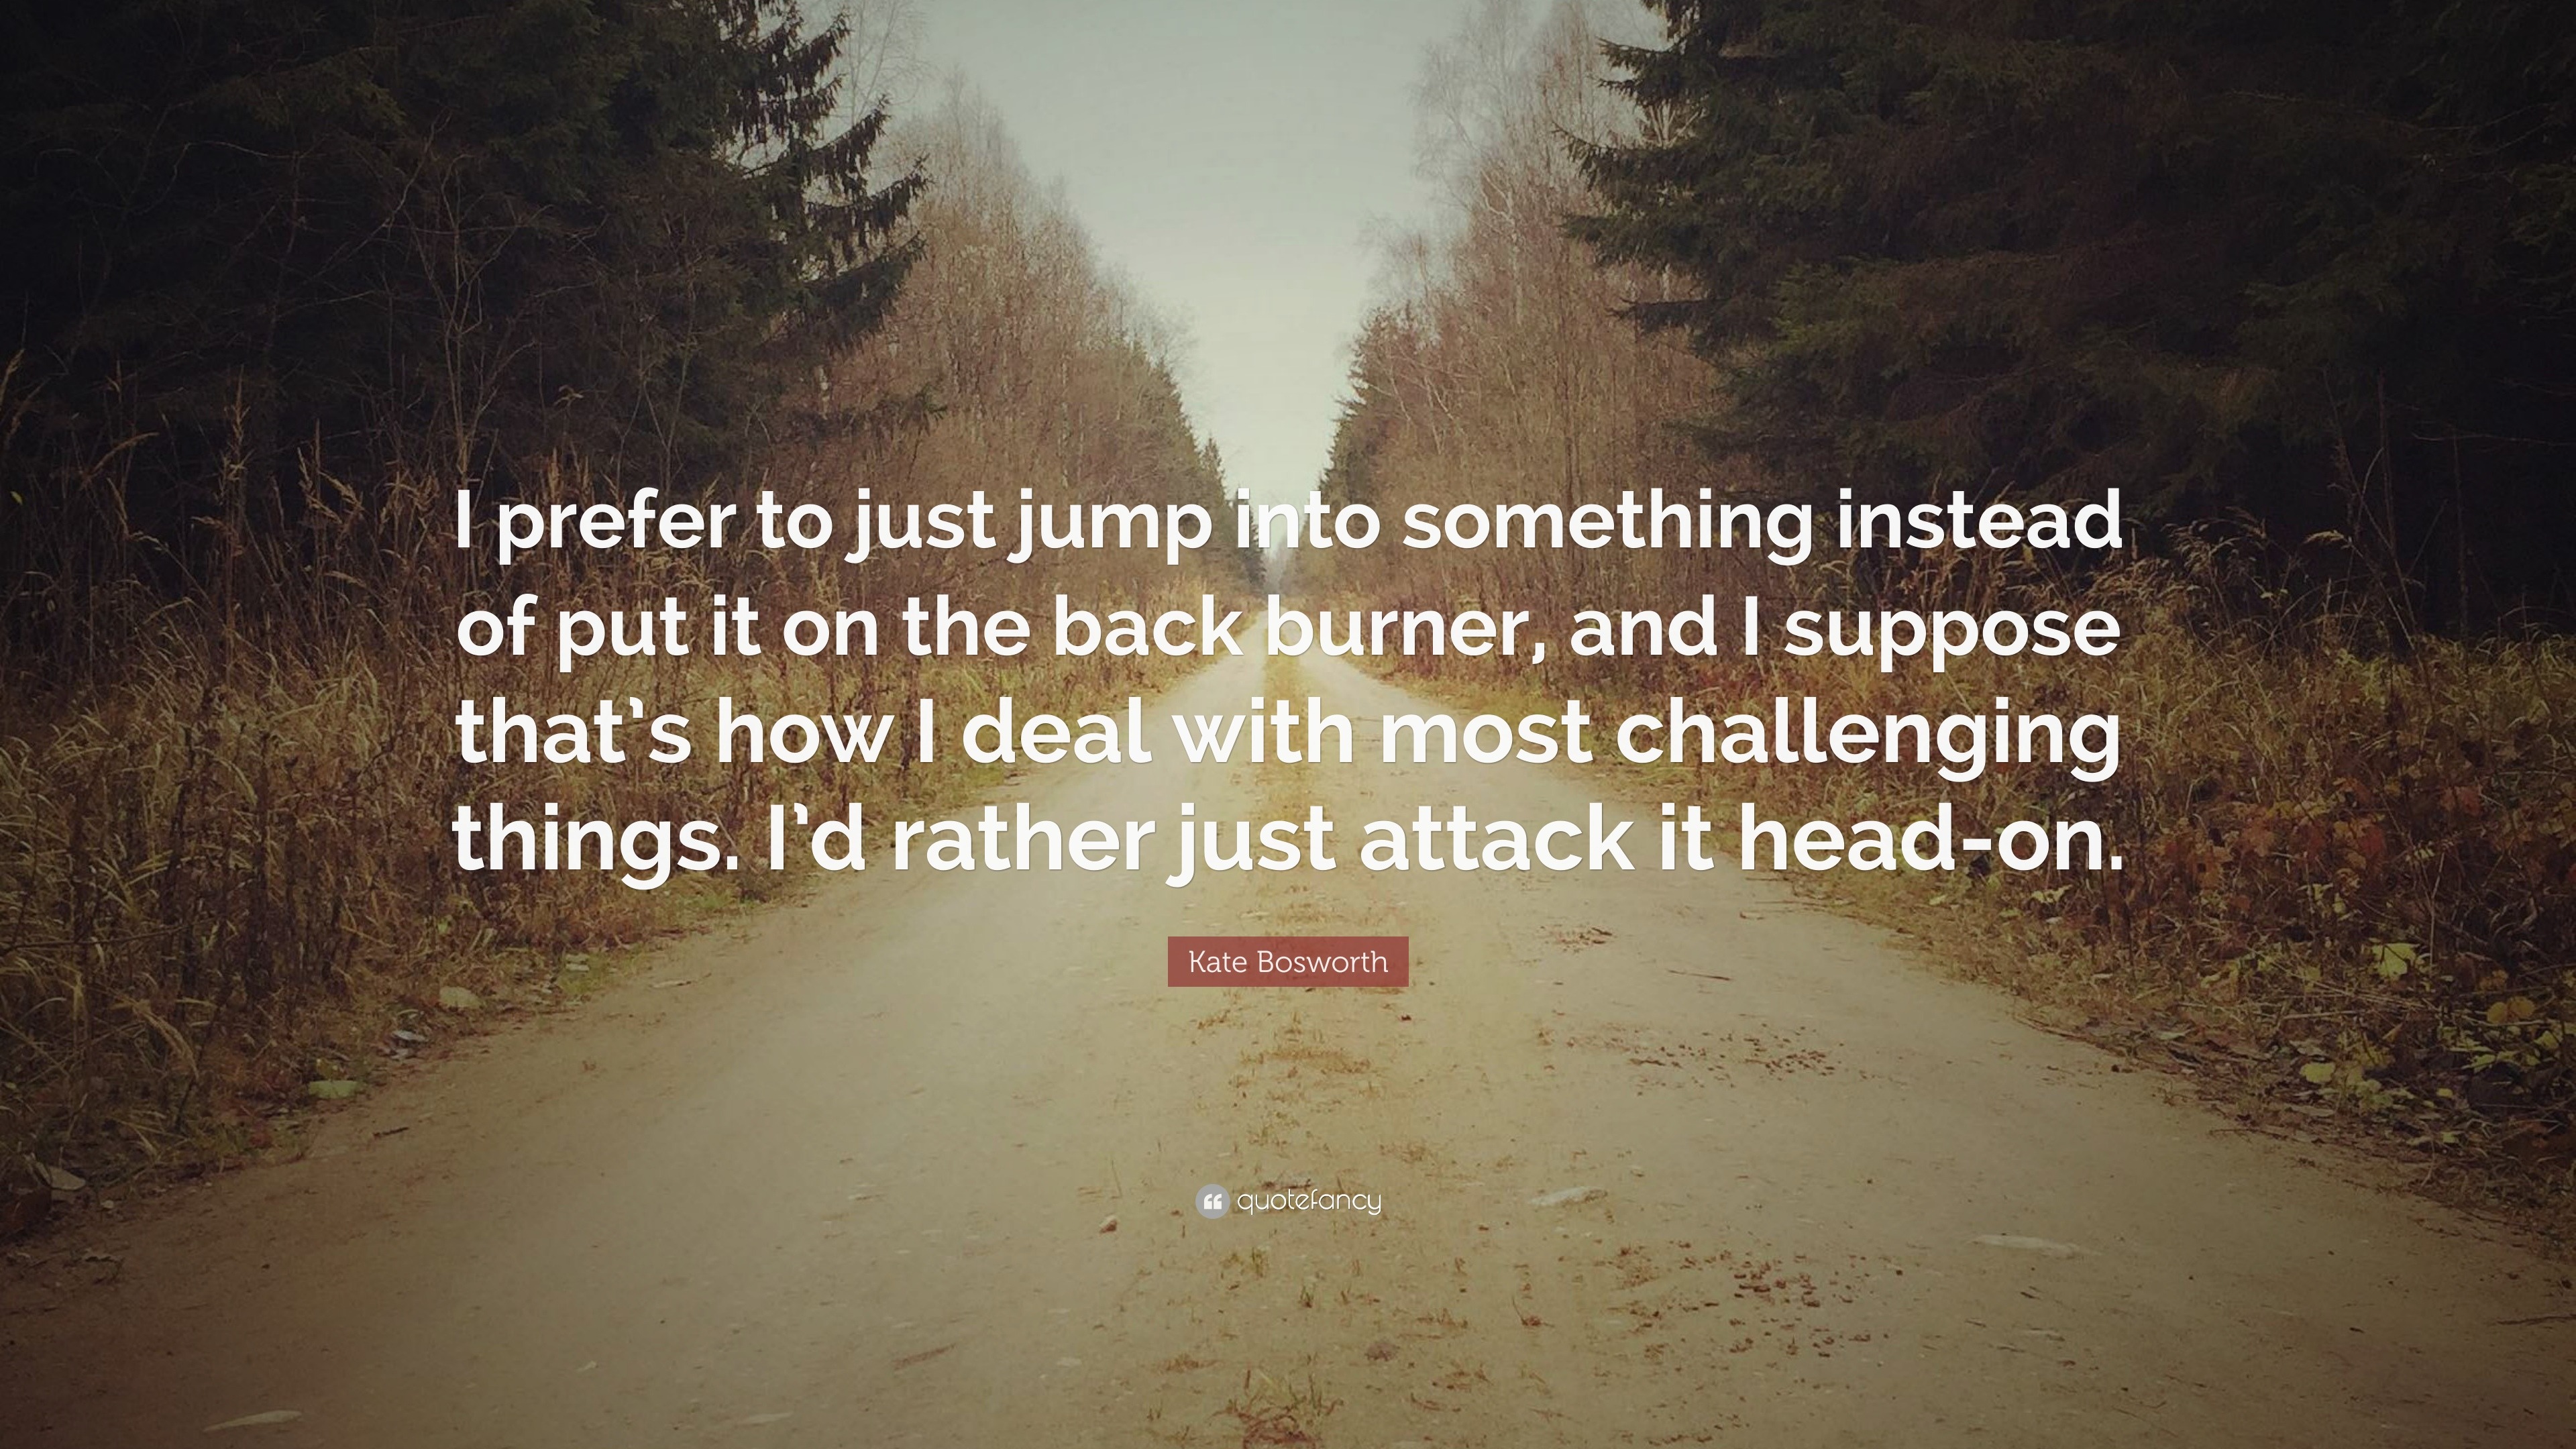 Kate Bosworth Quote: "I prefer to just jump into something instead of put it on the back burner ...